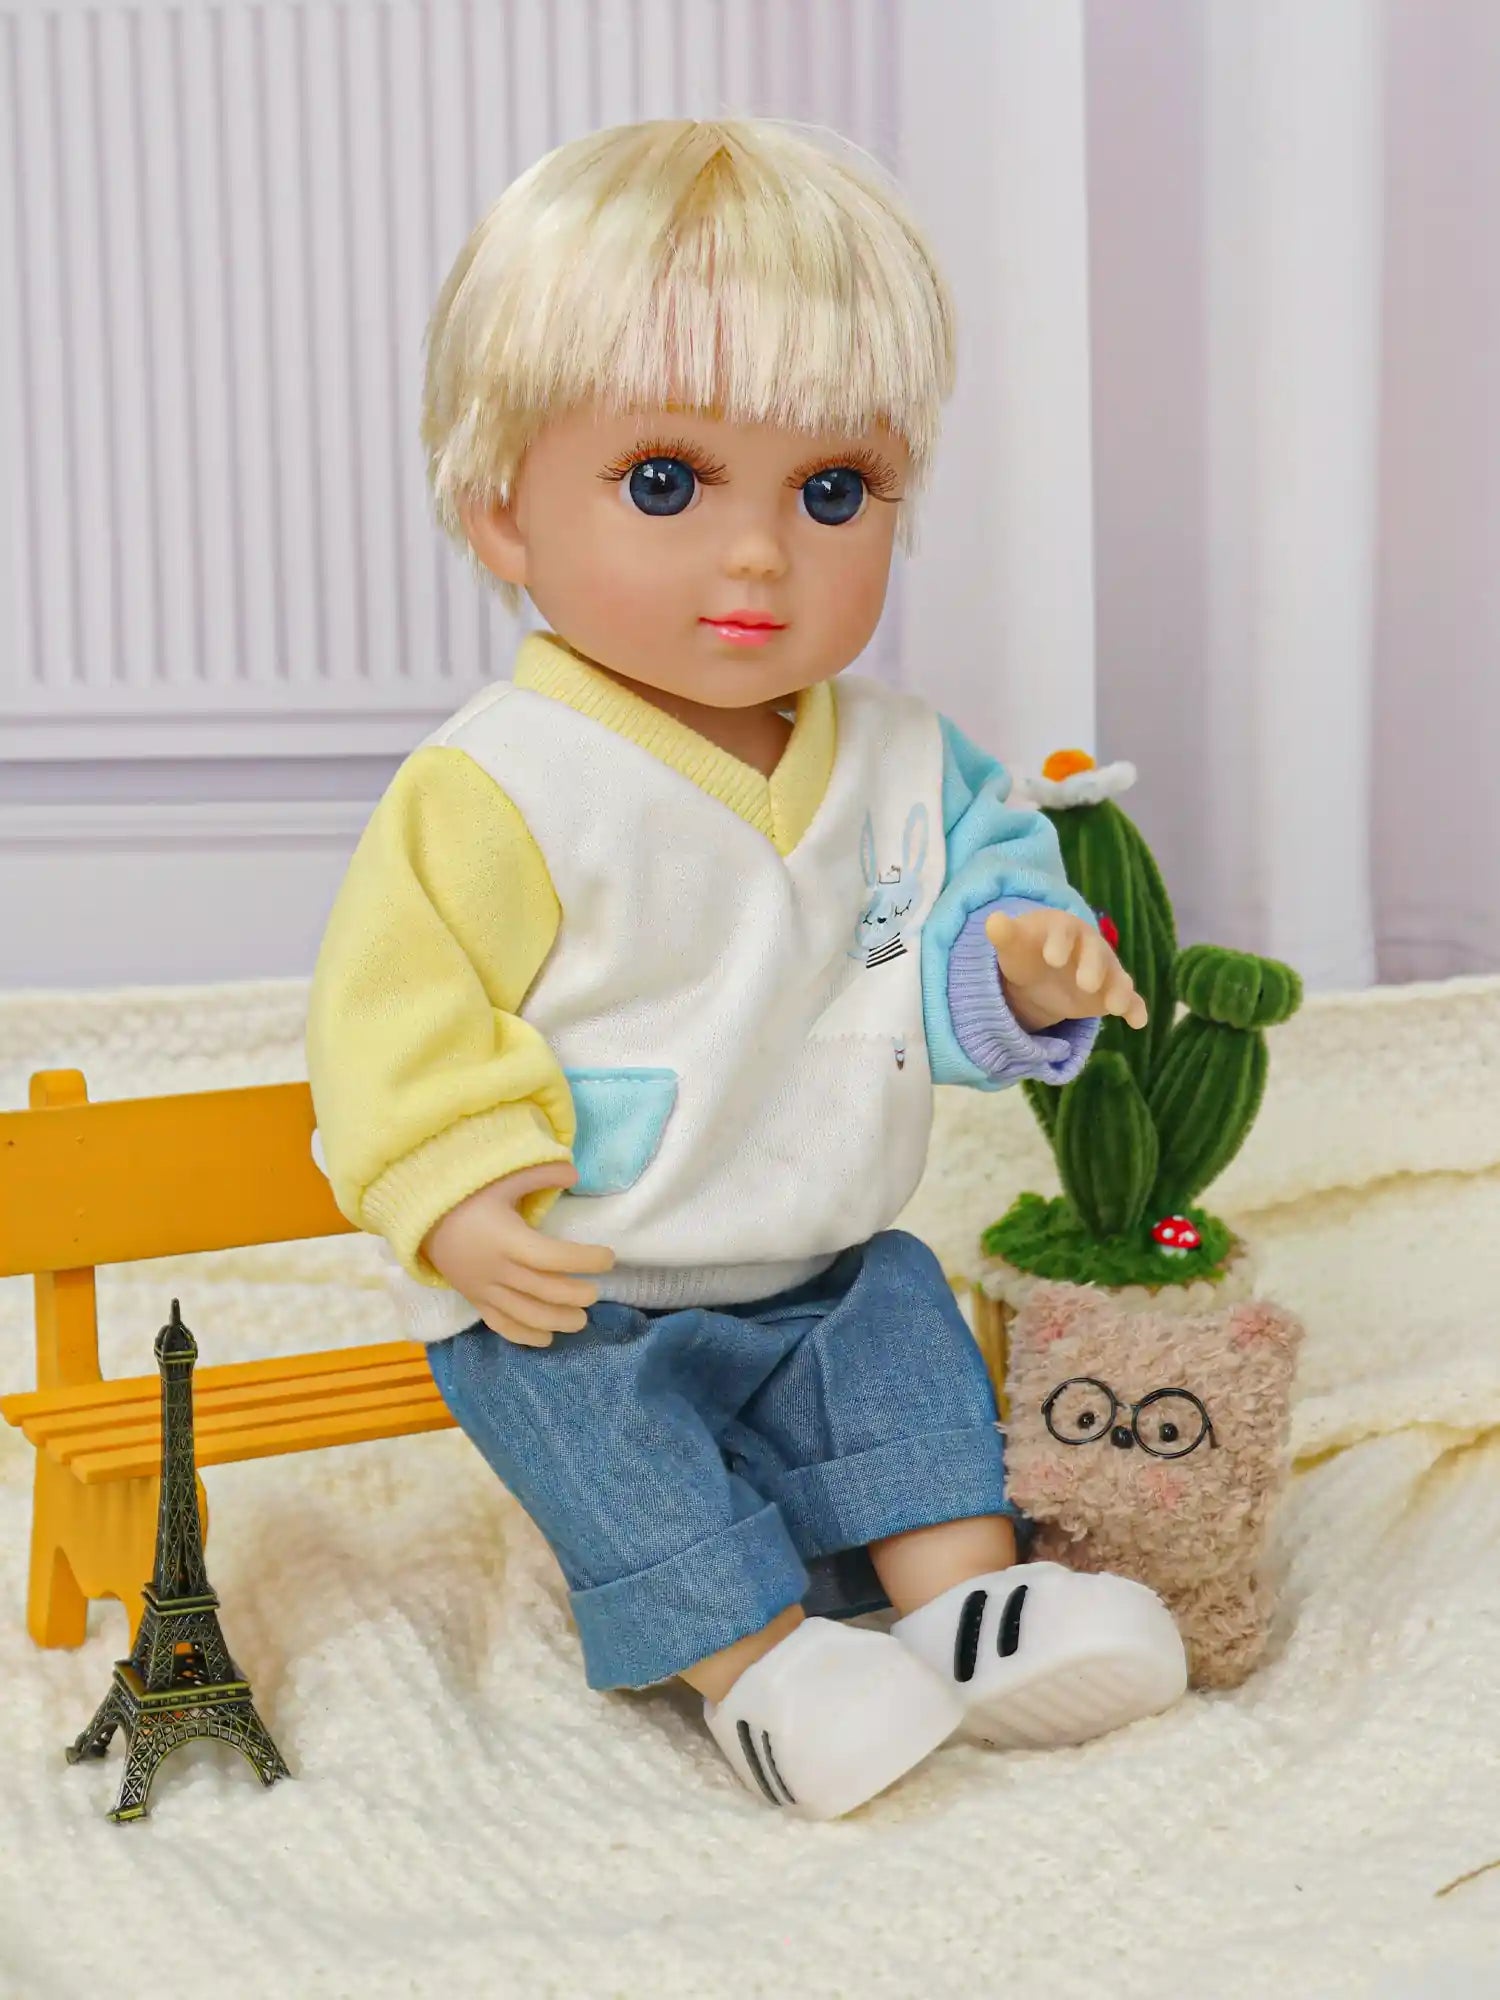 Adorable doll with striking blue eyes, sporting a casual modern look, with a knit toy companion.